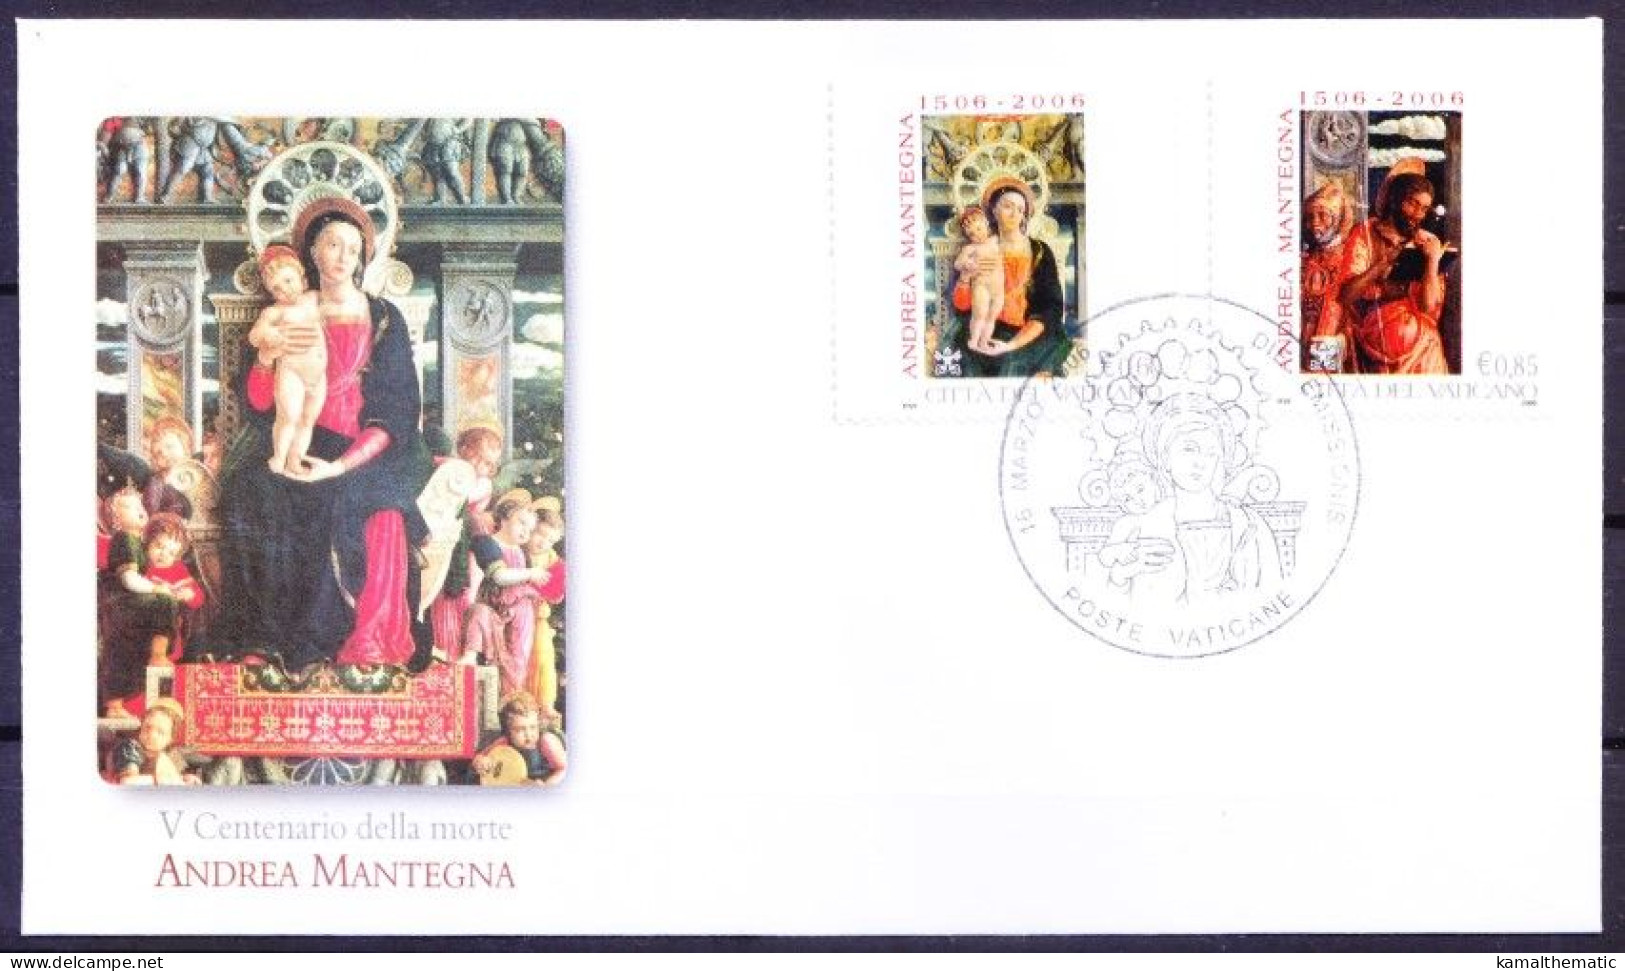 Vatican City 2006 FDC, Madonna & Child, Religious Painting By Mantegna - Paintings